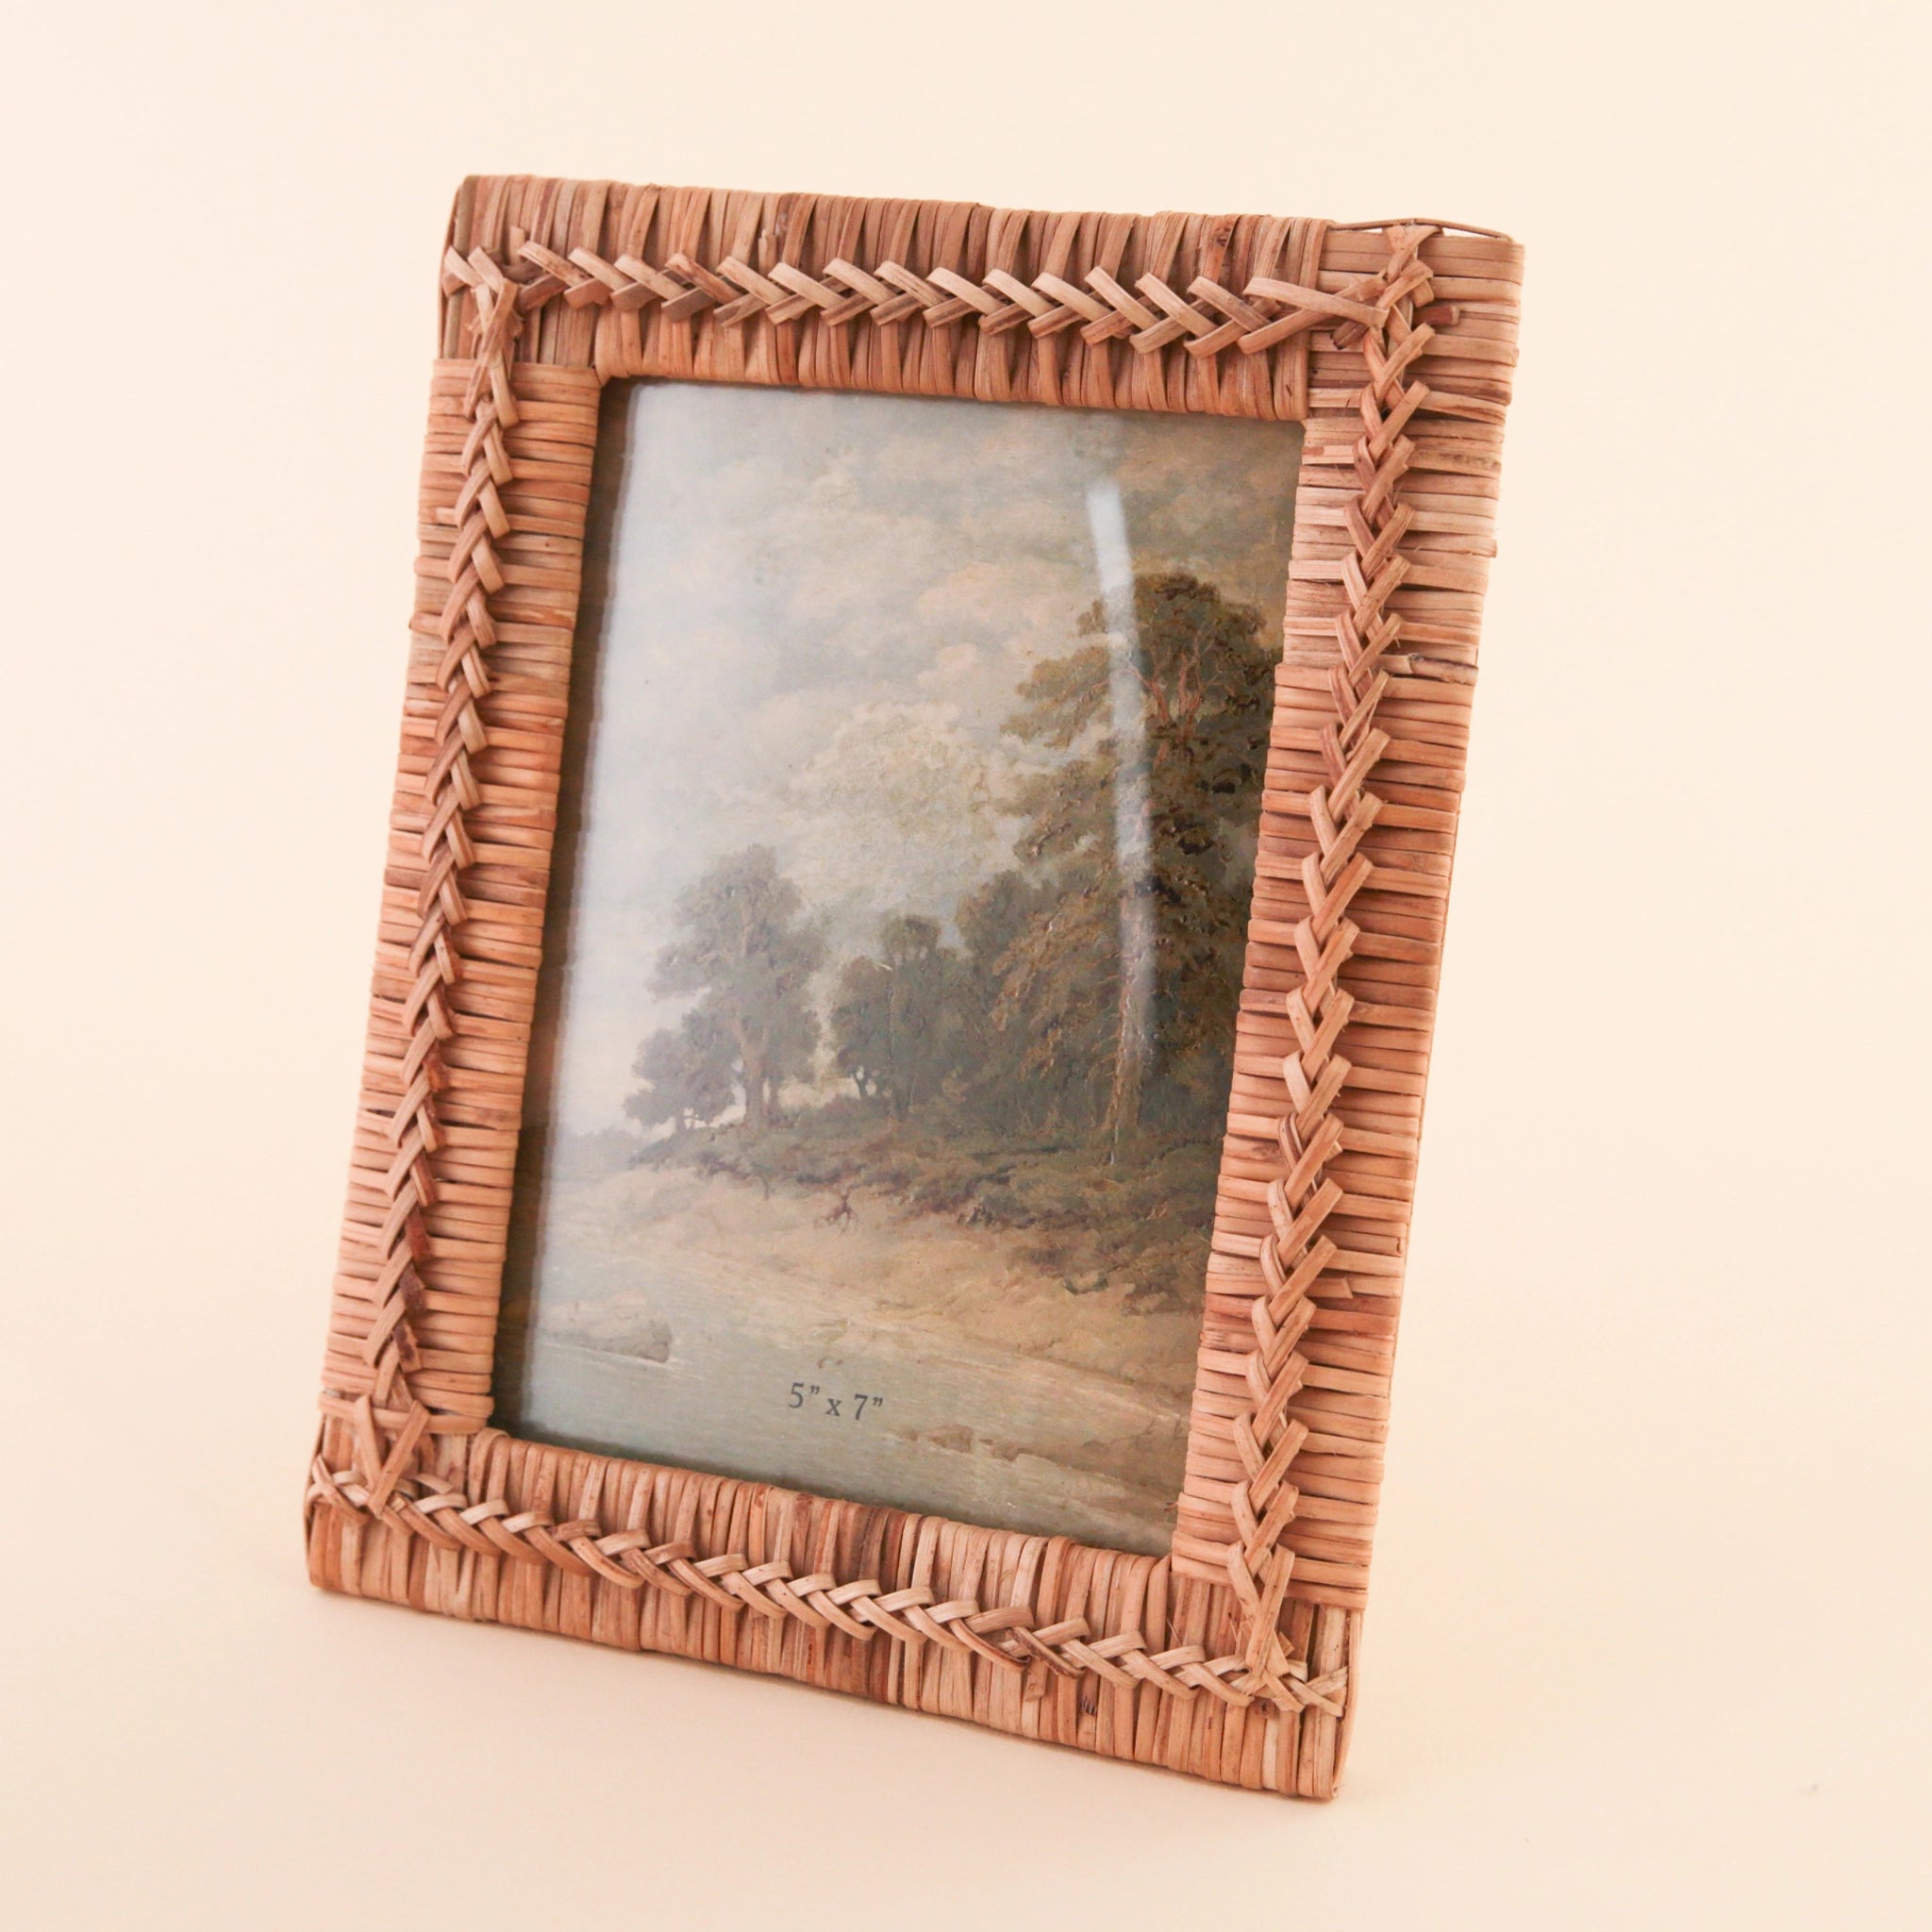 A 5&quot; x 7&quot; hand woven rattan frame a natural brown shade detailed with intricate stitching int he center.